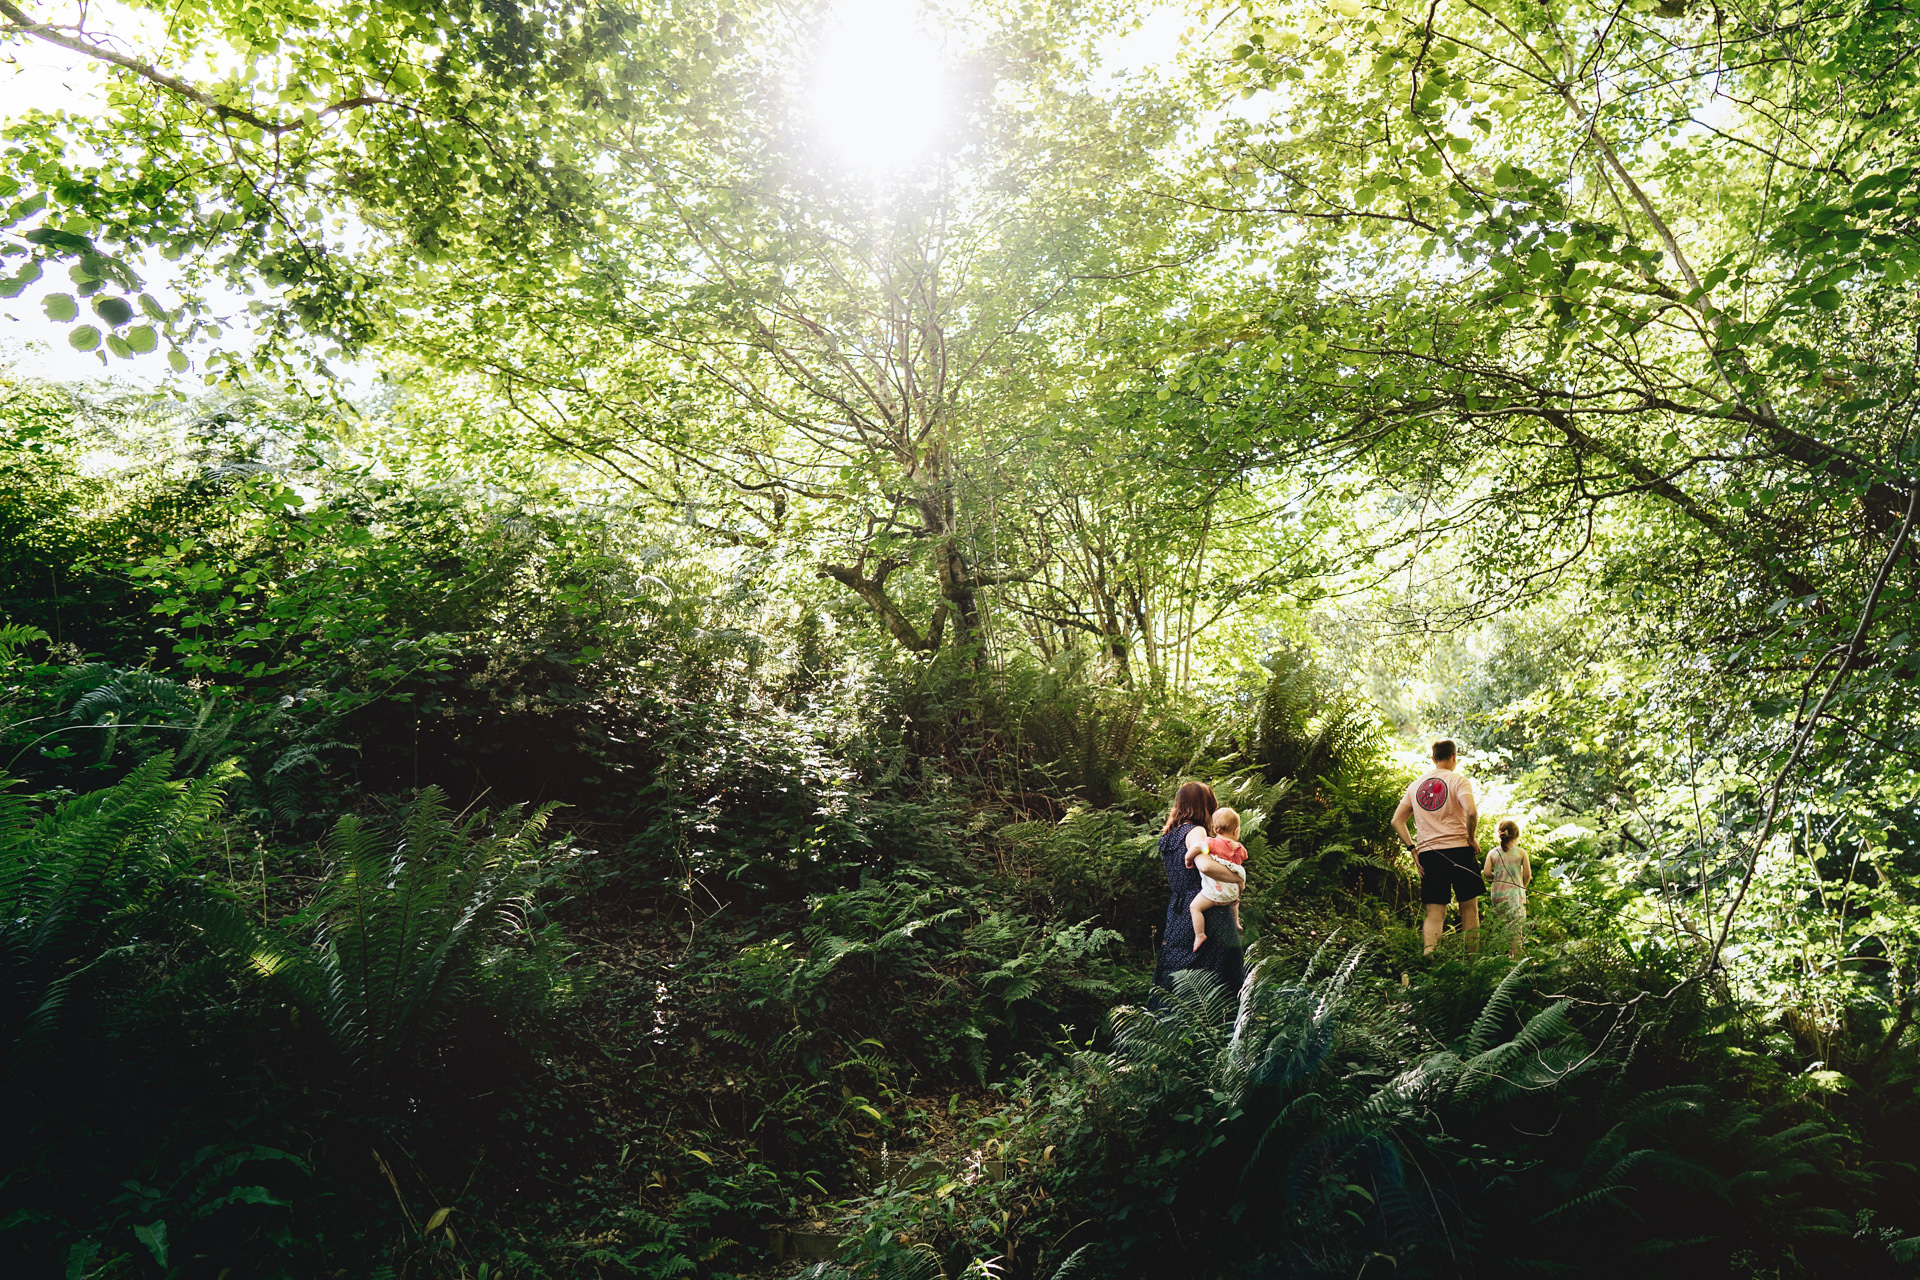 A family walking through lush green undergrowth, with the sun shining through trees above them